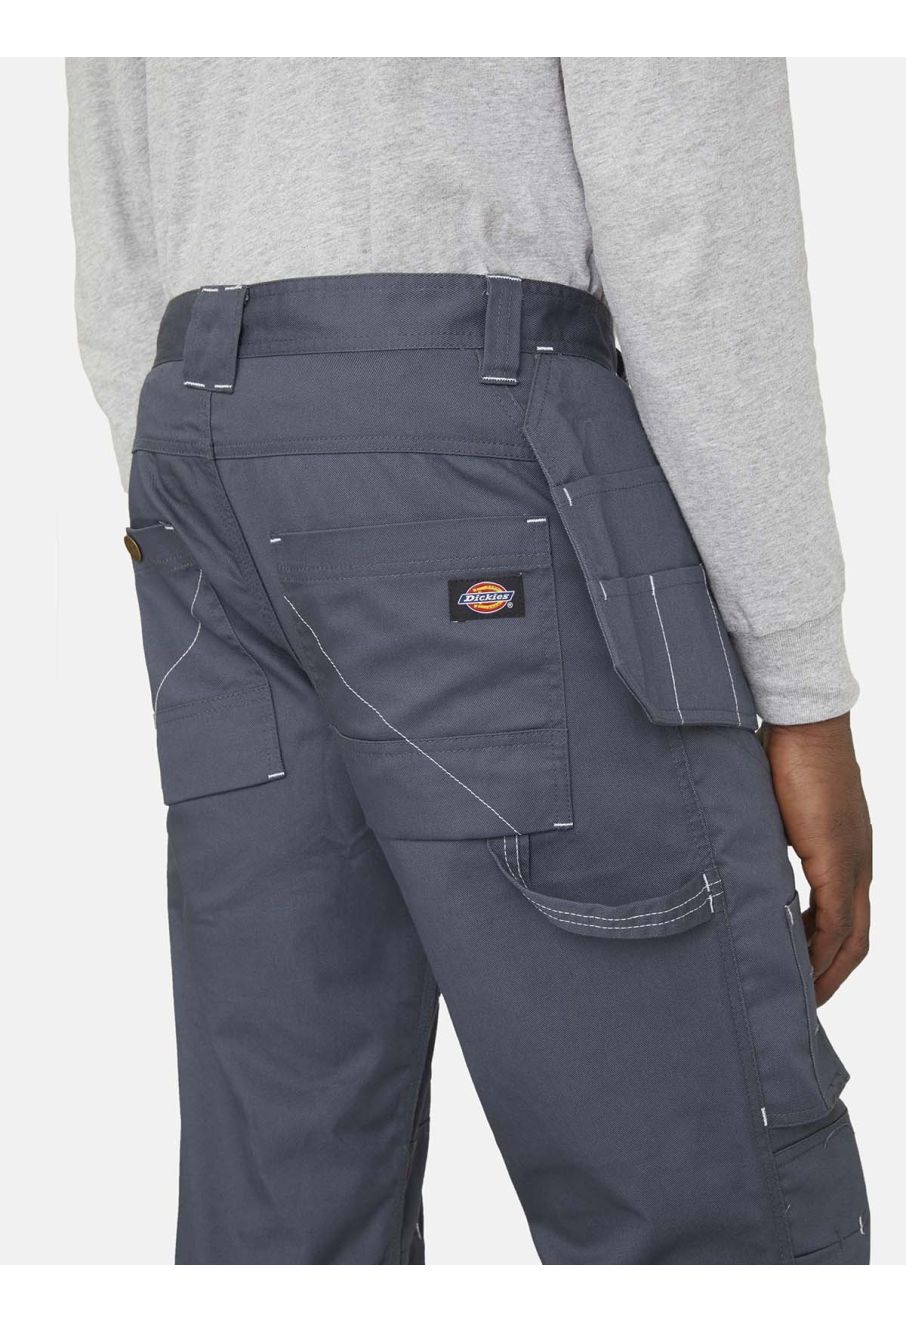 Dickies WD814 Redhawk Action Trousers - Tall